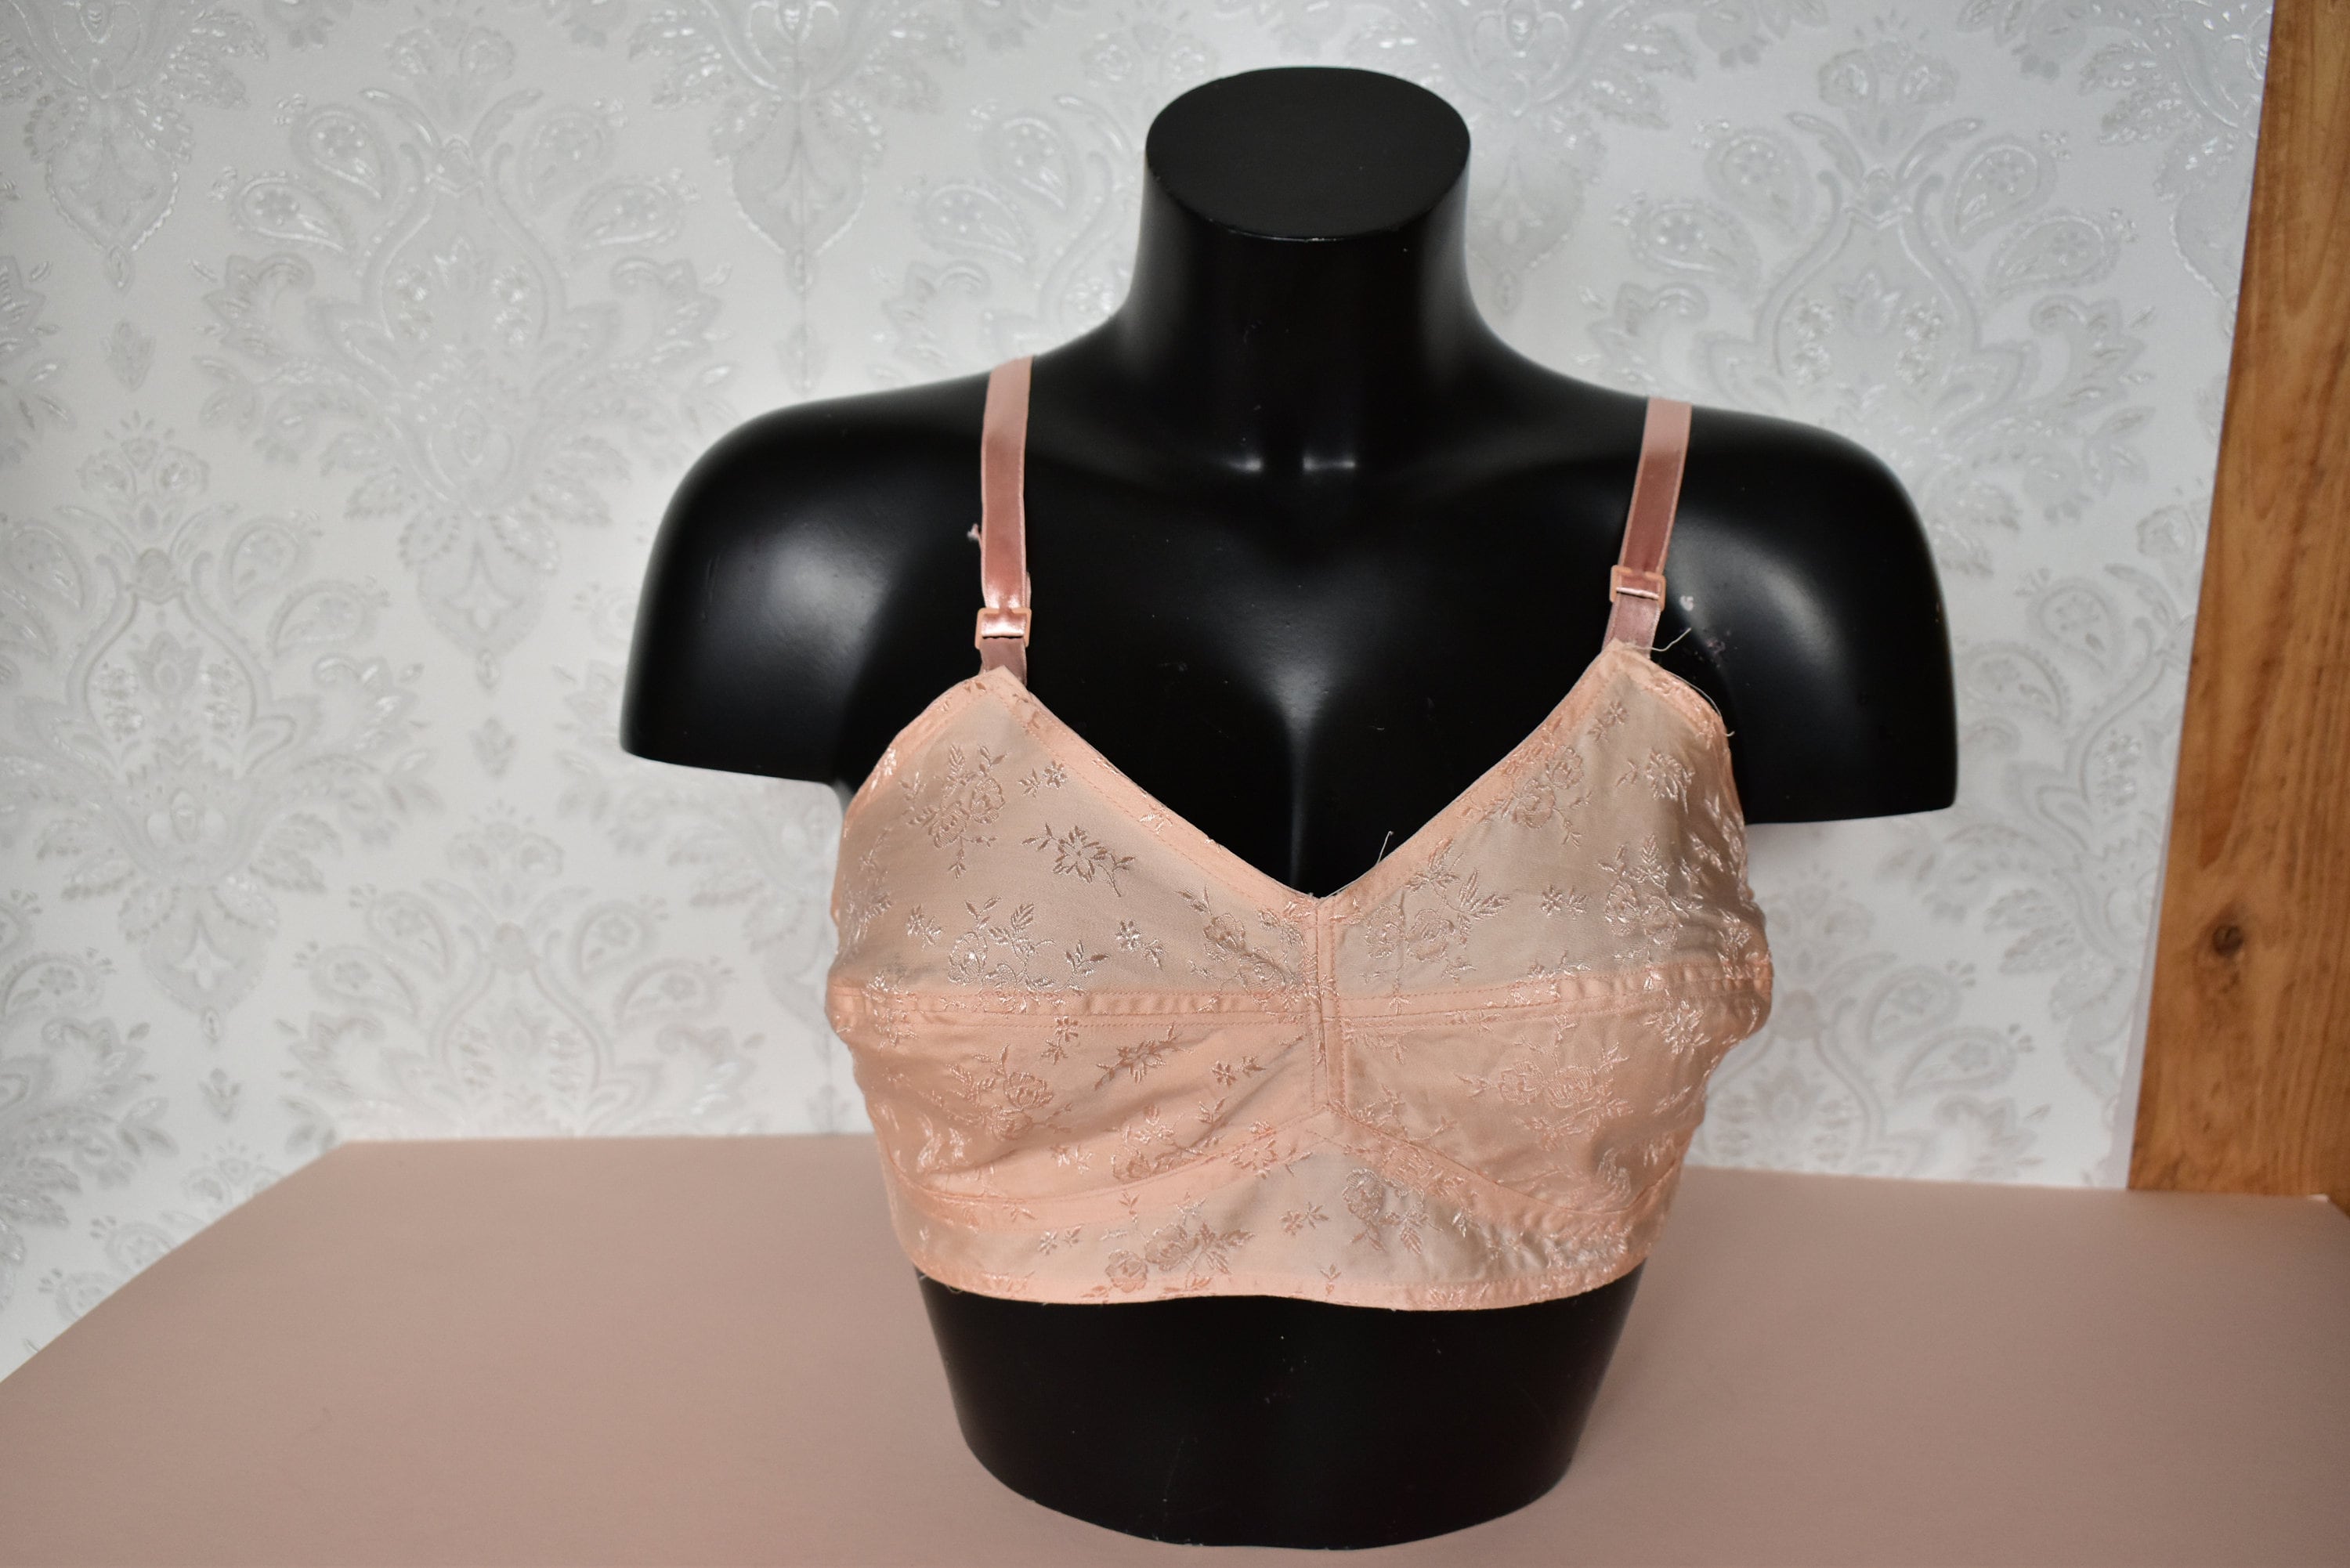 Buy Encircled Bullet Bra Organic 100% Cotton Round Stitch Full Coverage  Winsome Bra Vintage Pointy Bra With Center Elastic Retro White Online in  India 